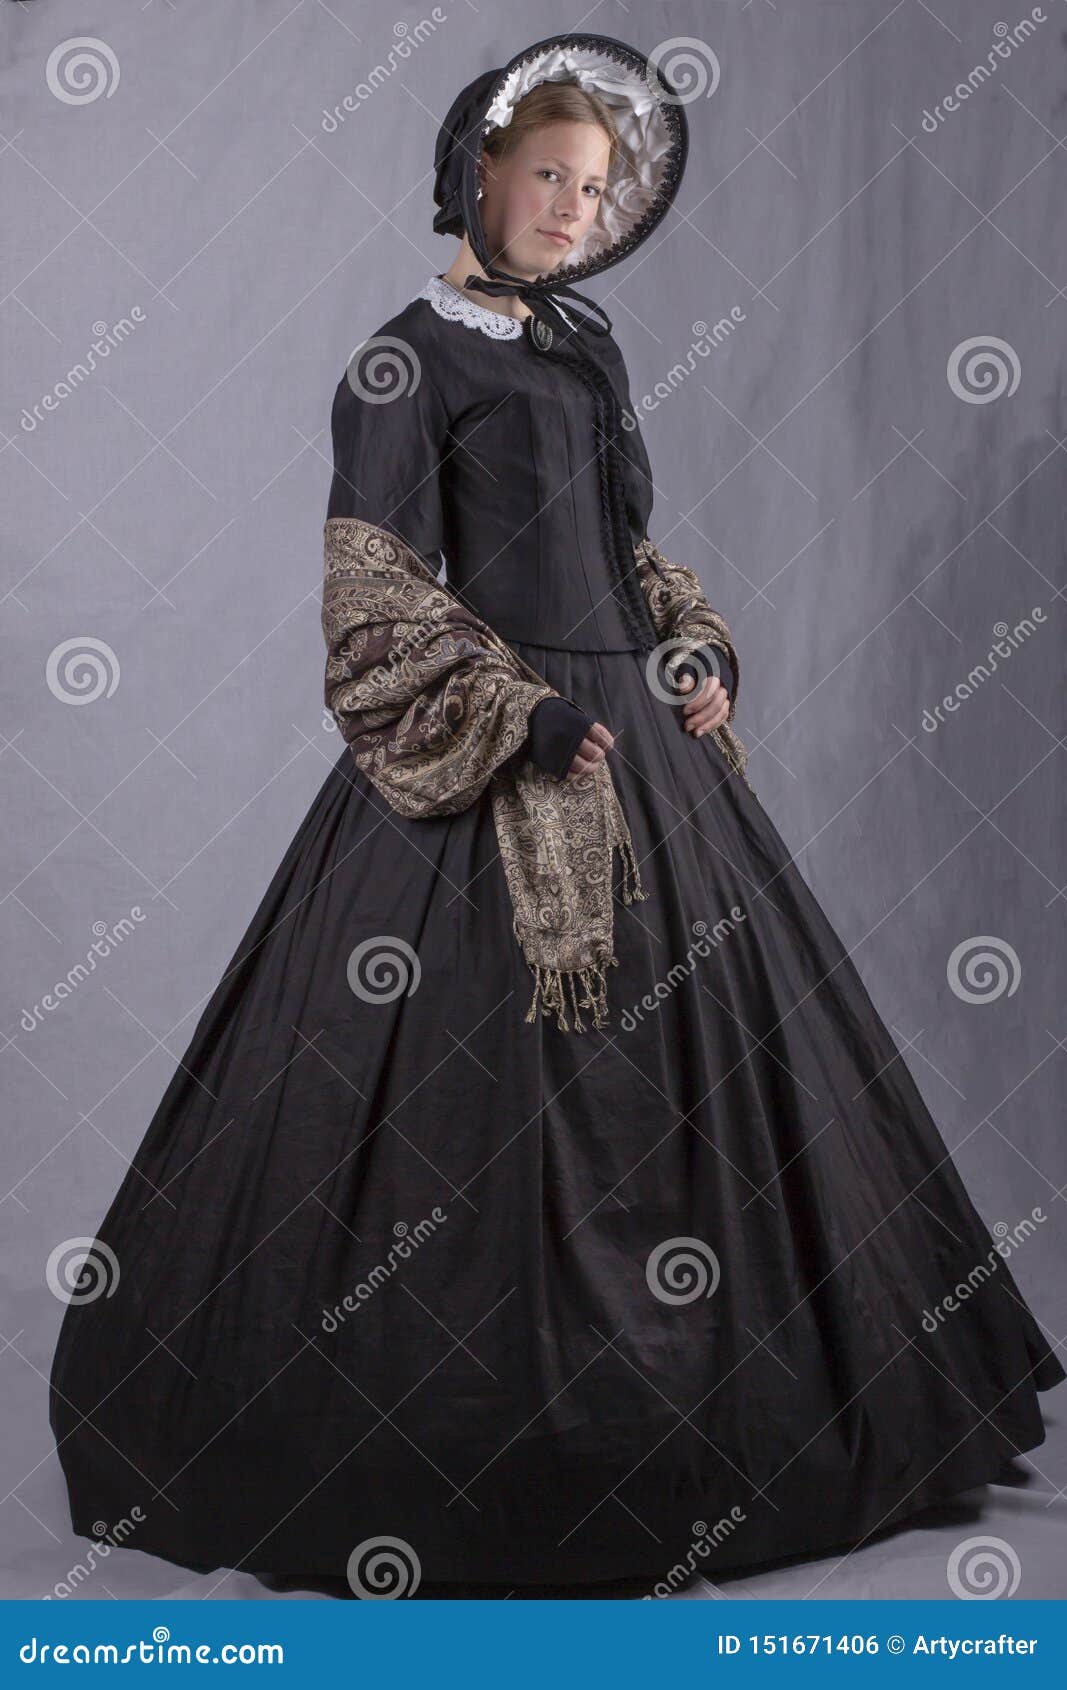 victorian woman in a black bodice, shawl and bonnet